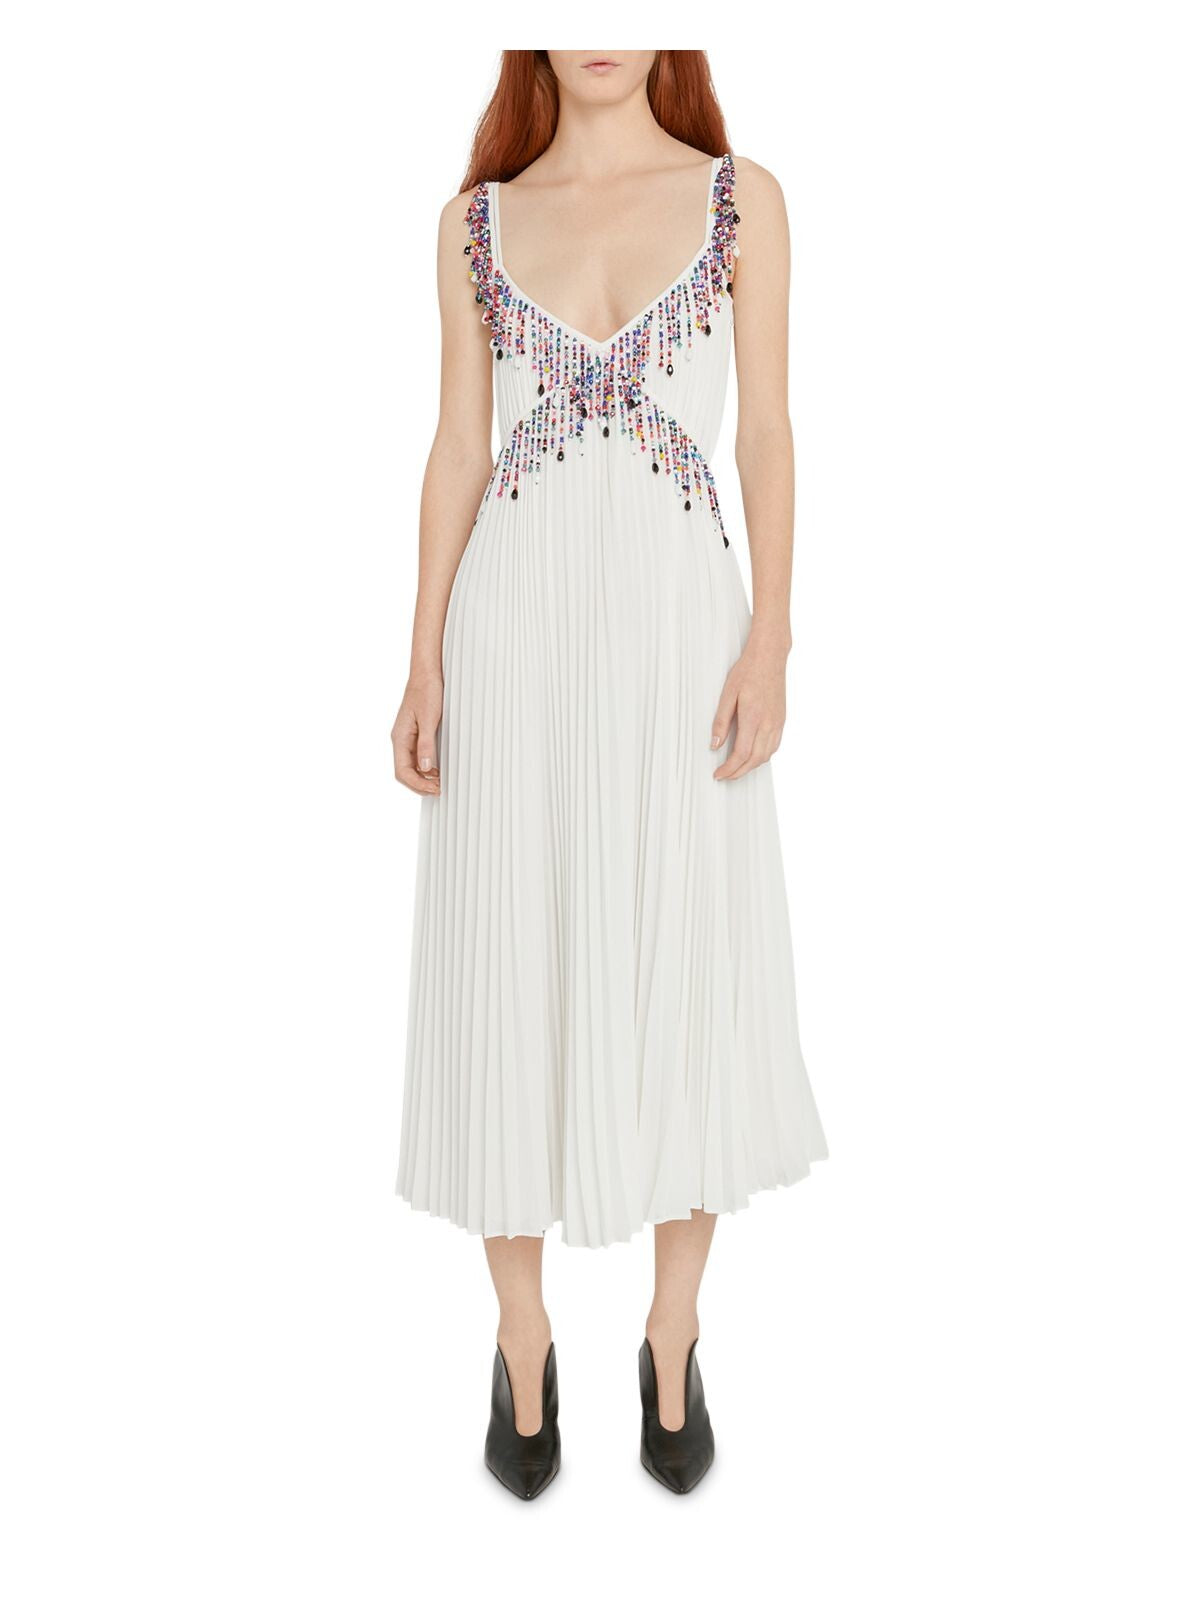 CHRISTOPHER KANE Womens White Beaded Pleated Lined Sheer Adjustable Spaghetti Strap V Neck Midi Cocktail Fit + Flare Dress 8